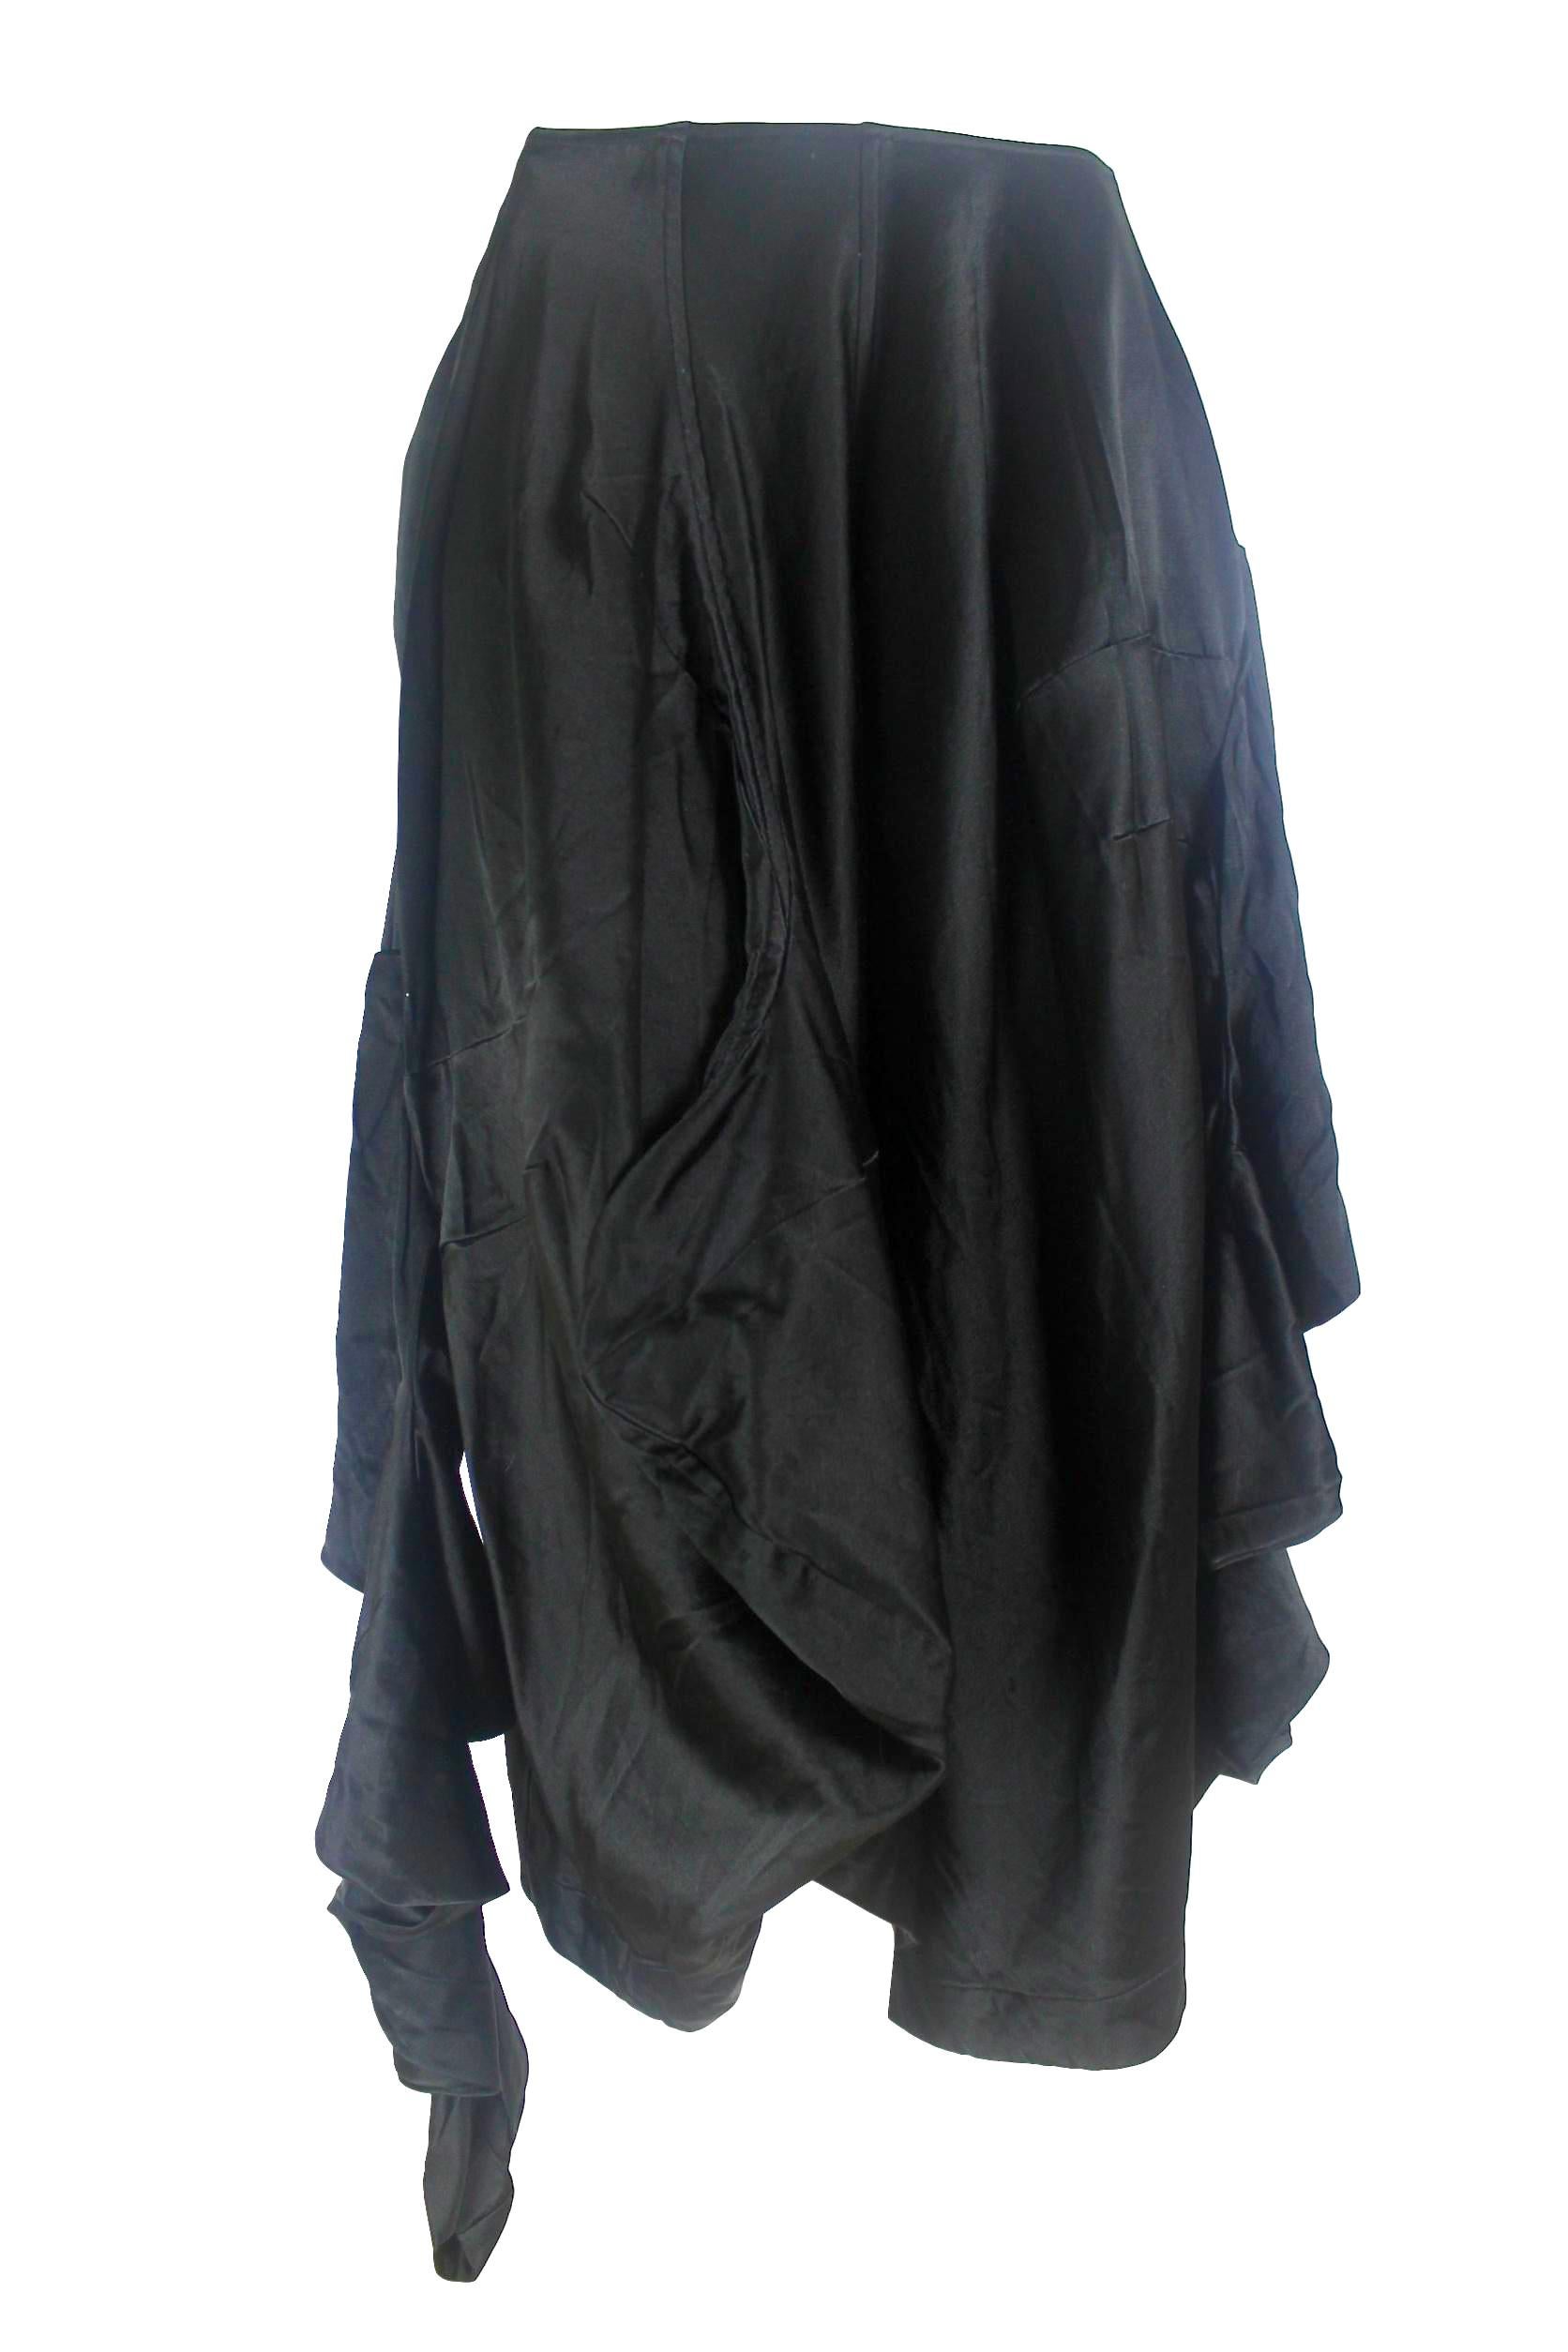 Comme des Garcons Wool/Silk Twisted Sleeve Skirt AD 2004 Dark Romance For Sale 7